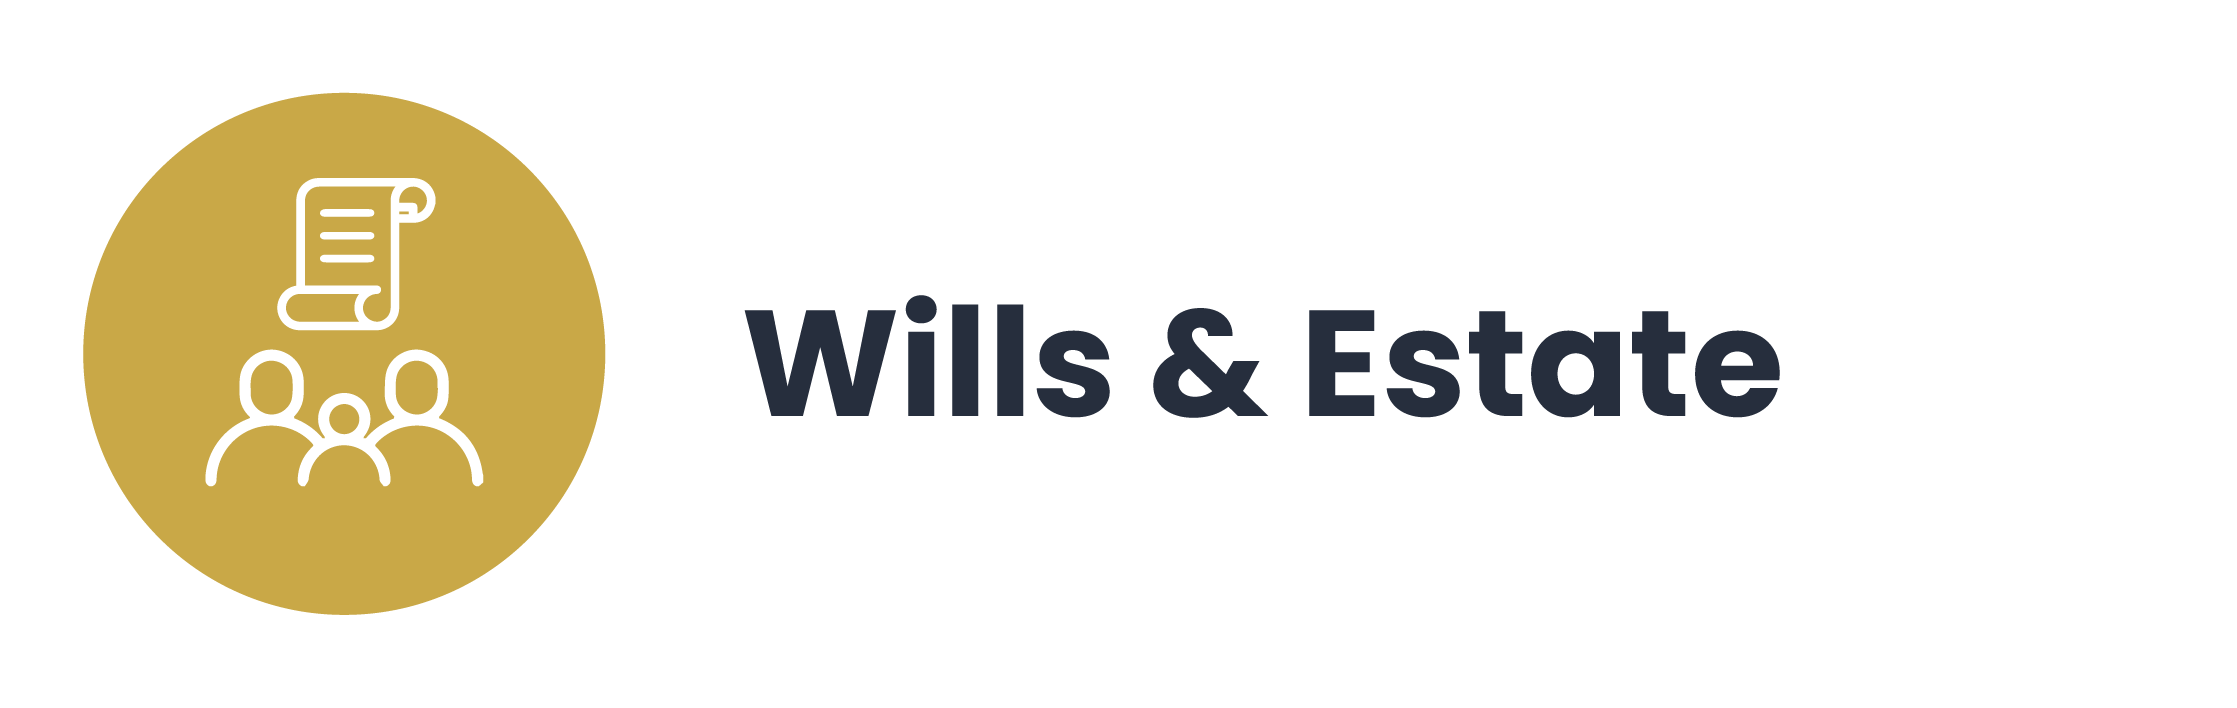 BR_Solicitors_Buderim_Icons_Wills_and_estates.png